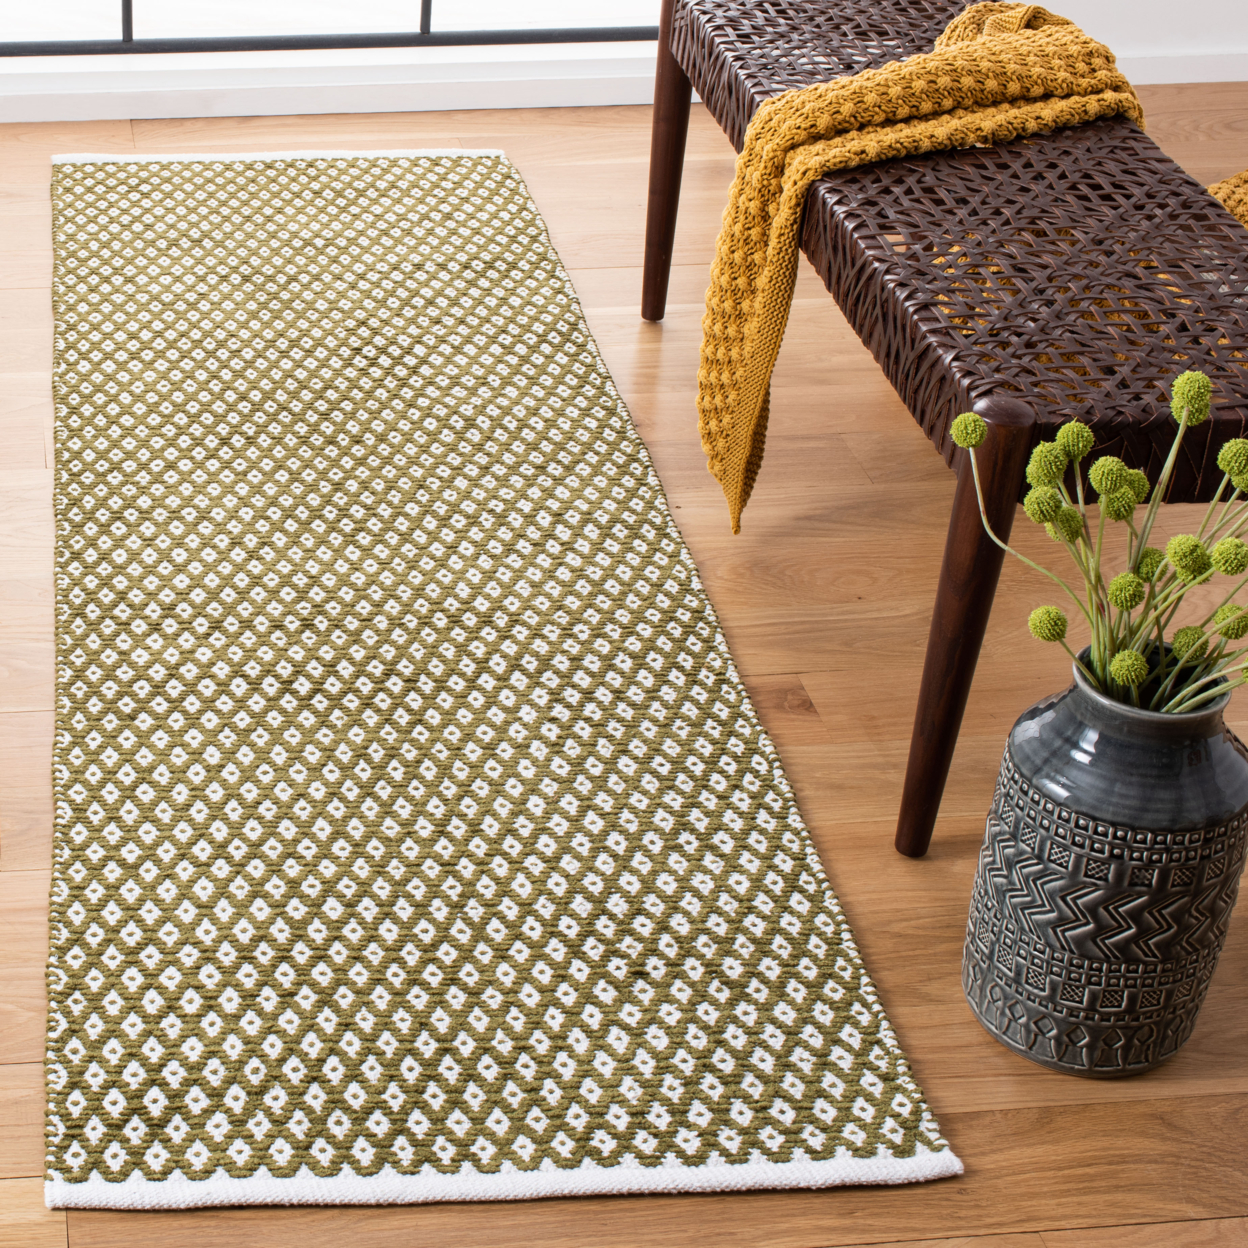 SAFAVIEH Boston Collection BOS685B Handwoven Olive Rug - 5' X 8'